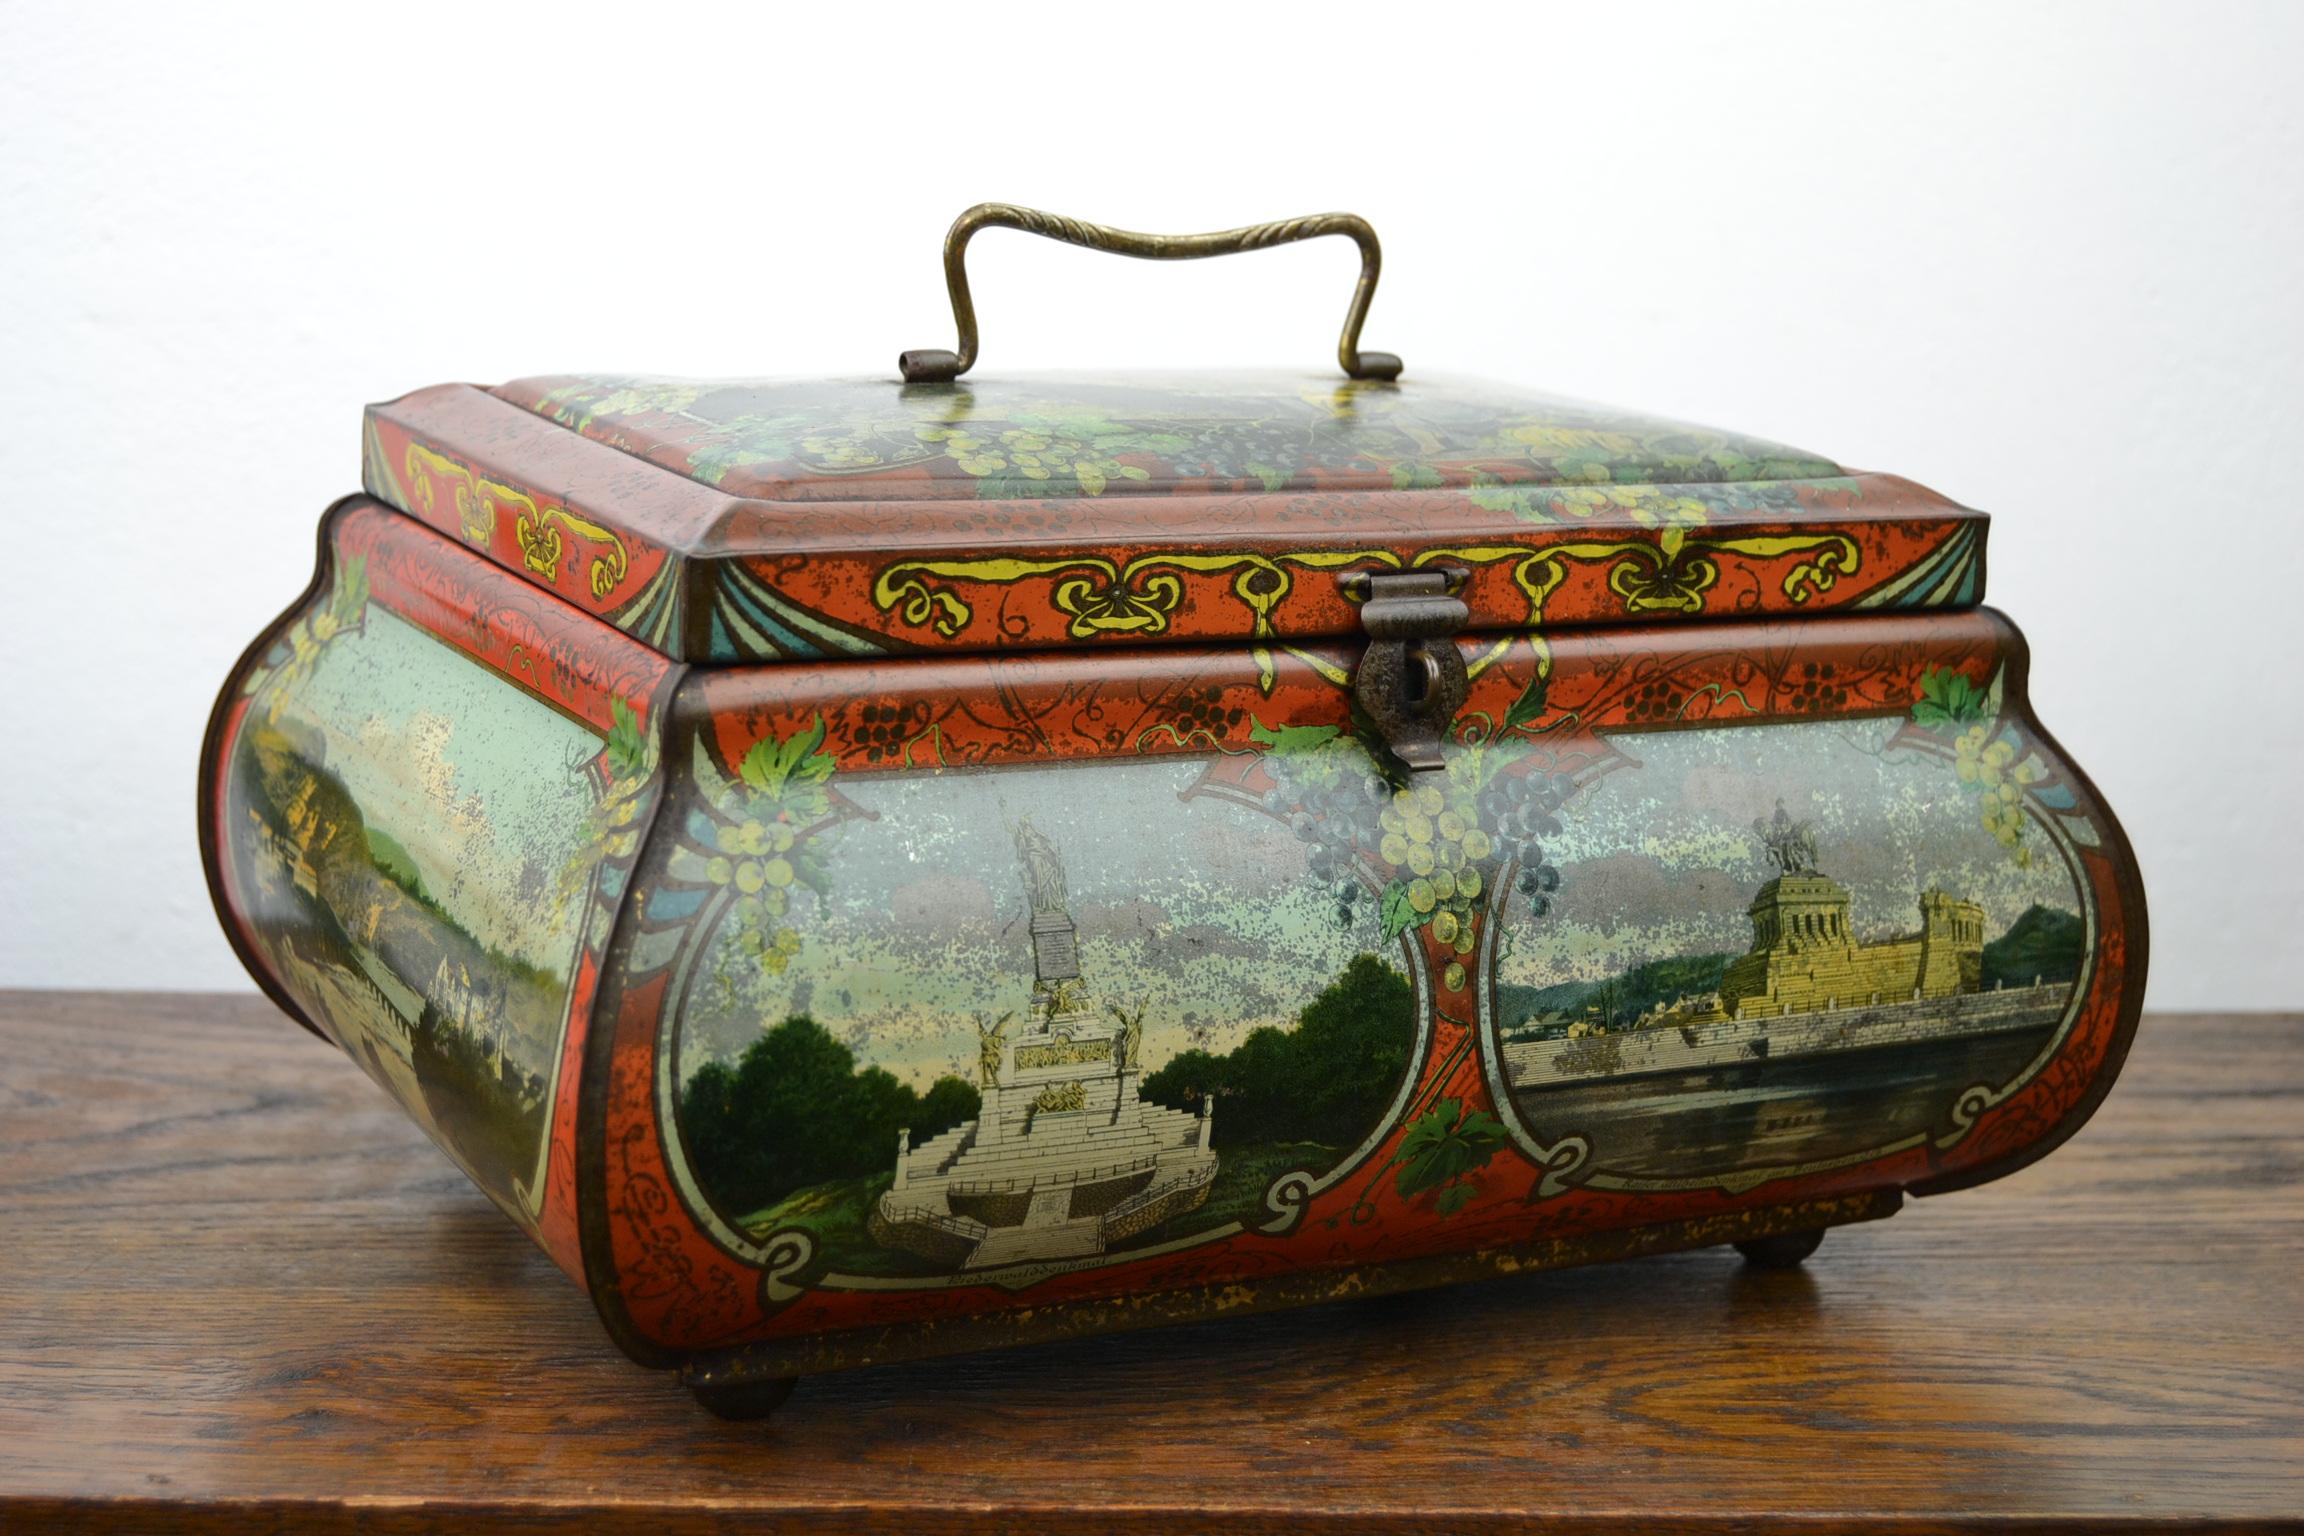 Beautiful lithographic tin with lid, handle and lock.
This tin storage box has a nice shape, beautiful colors and Graceful Art Nouveau Patterns.
It has German places all around, they are located between Koln - Cologne and Zurich. 

On top of the